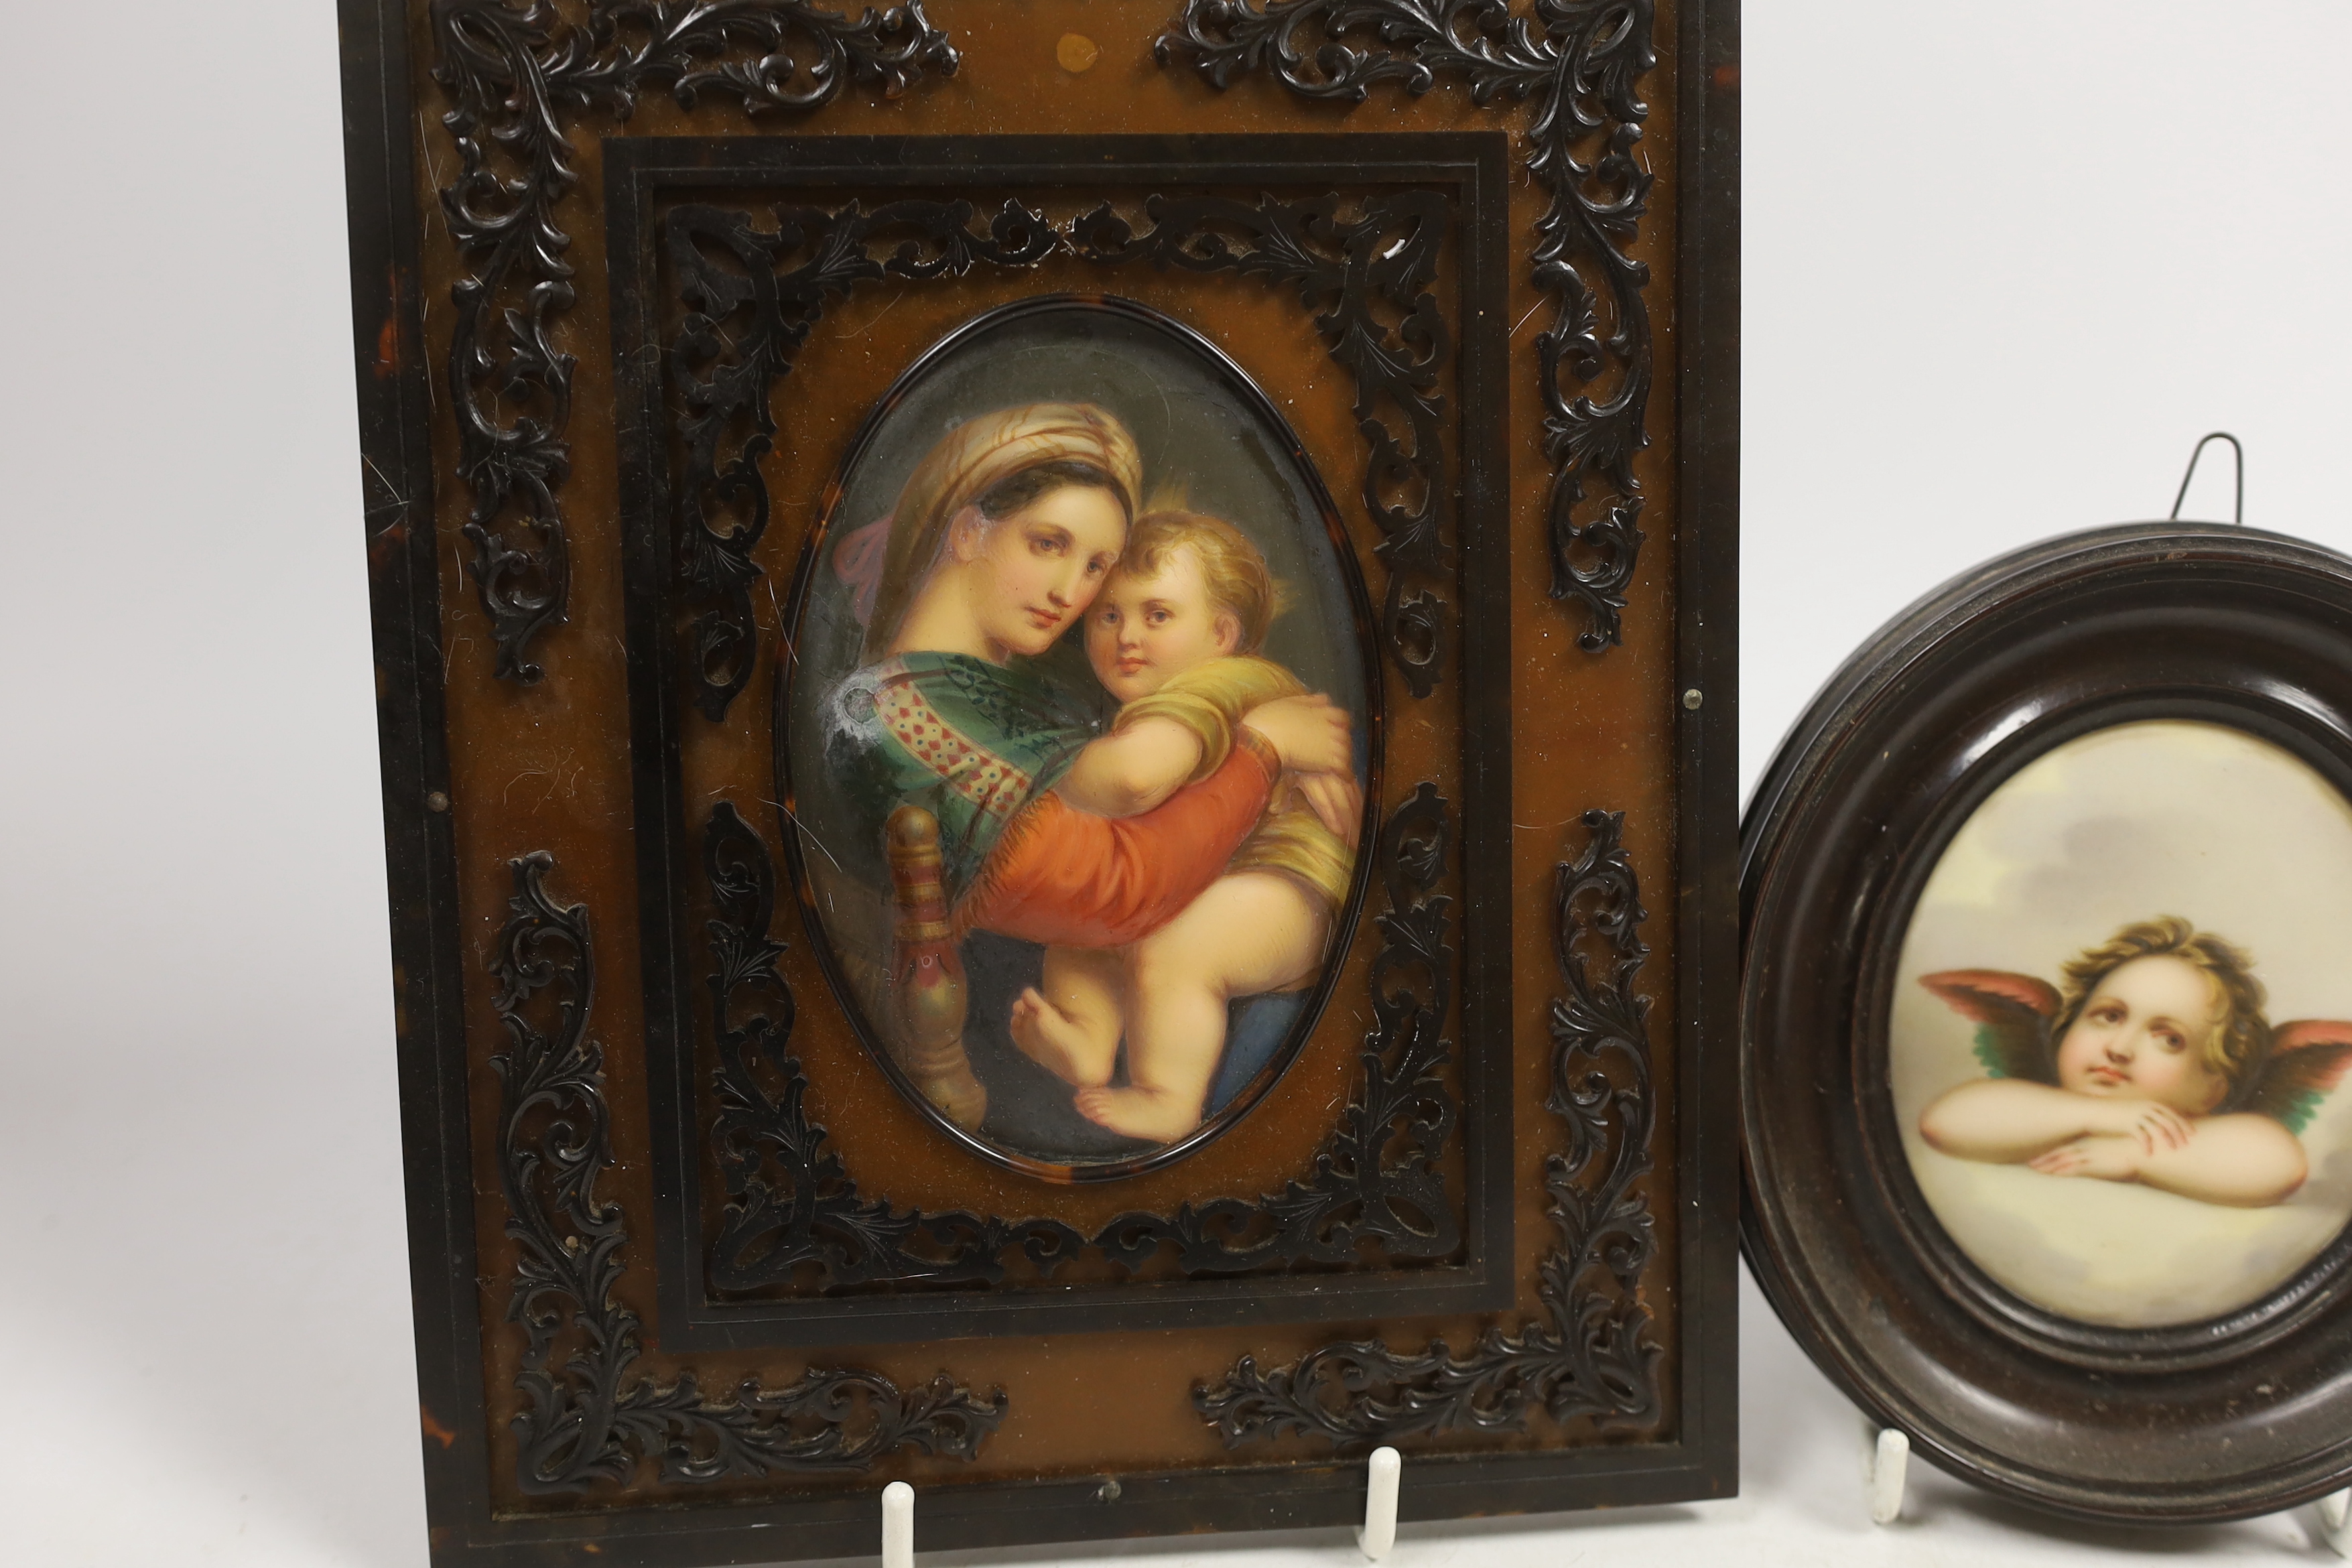 An oval porcelain plaque of mother and child in an ornate frame and a smaller circular porcelain - Image 2 of 4